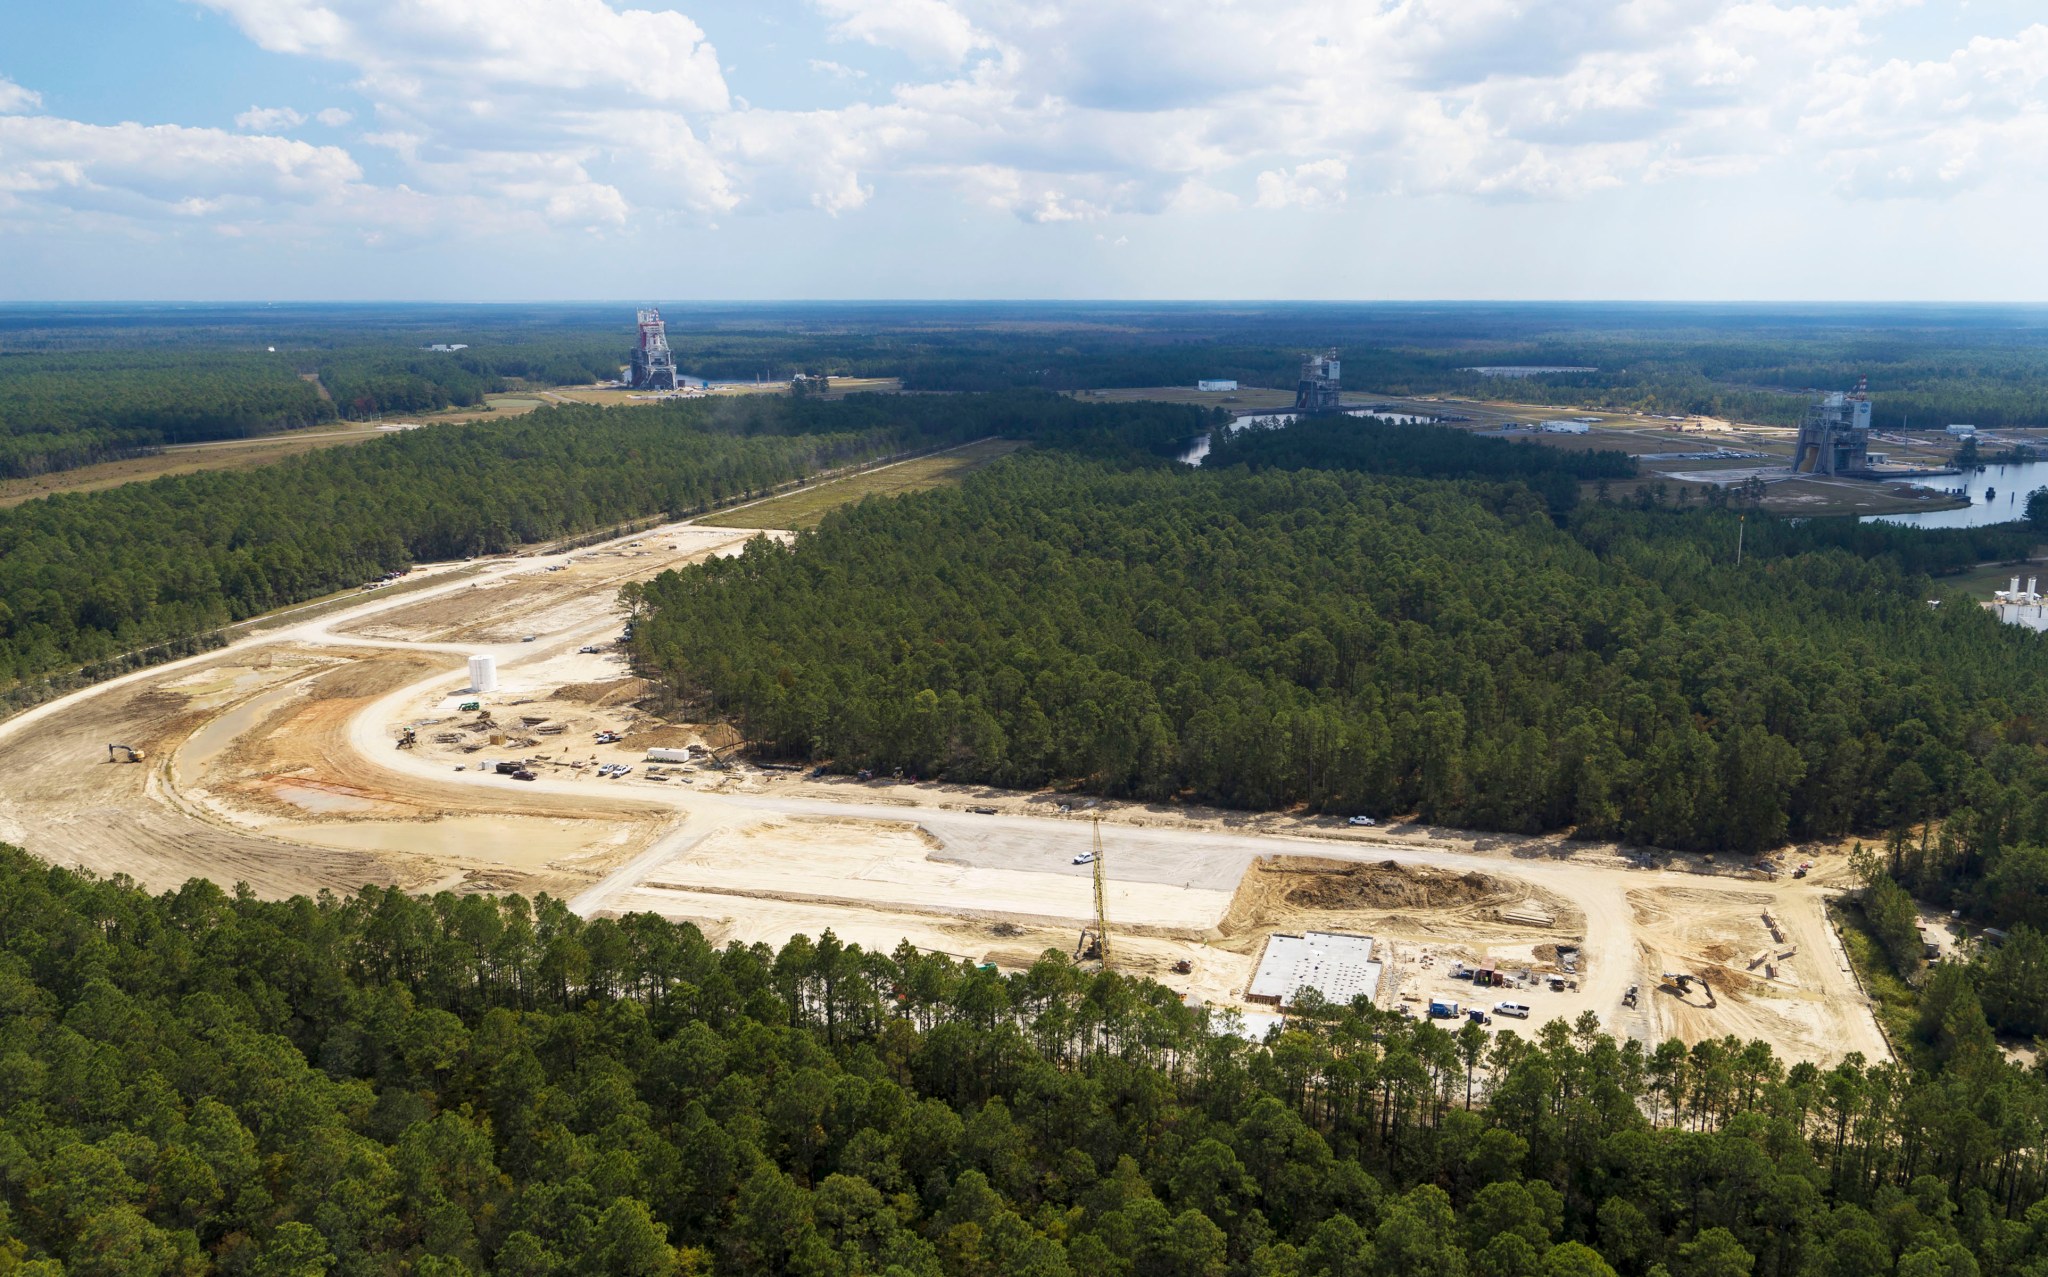 A drone image shows an area at NASA’s Stennis Space Center under development by Relativity Space.